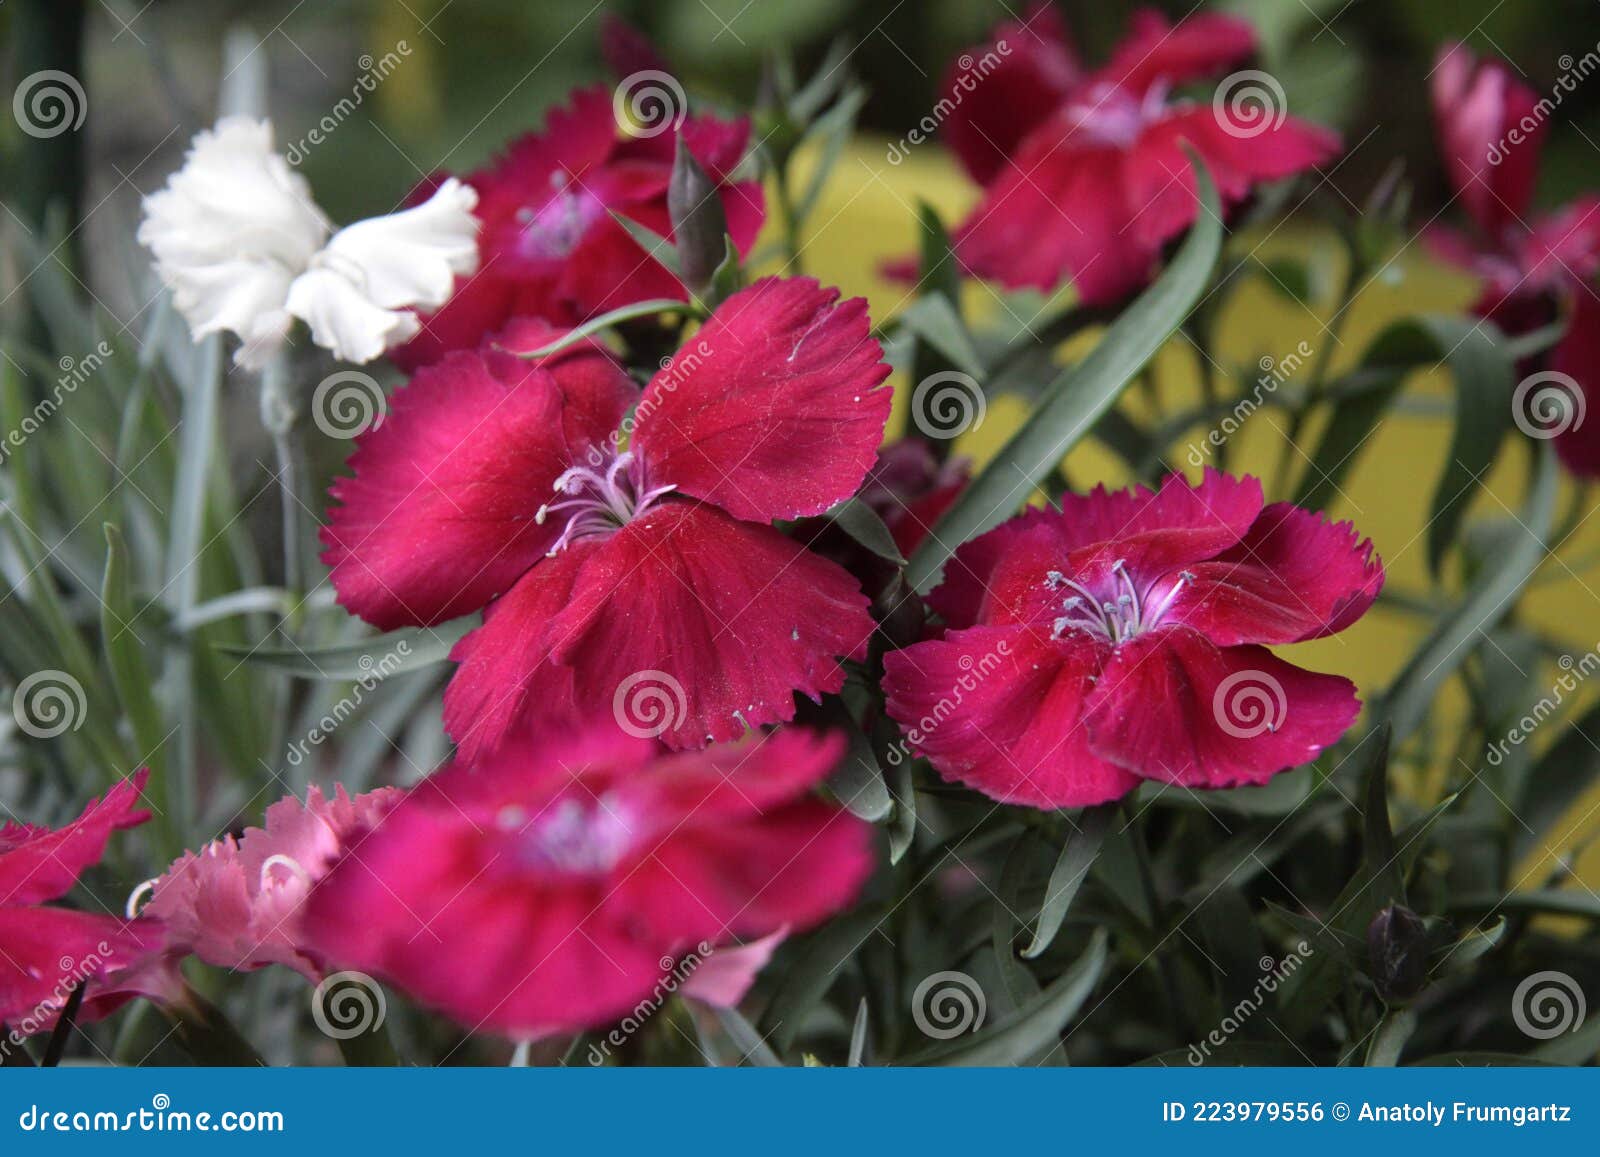 medicative herb: red flowers of carnation close up